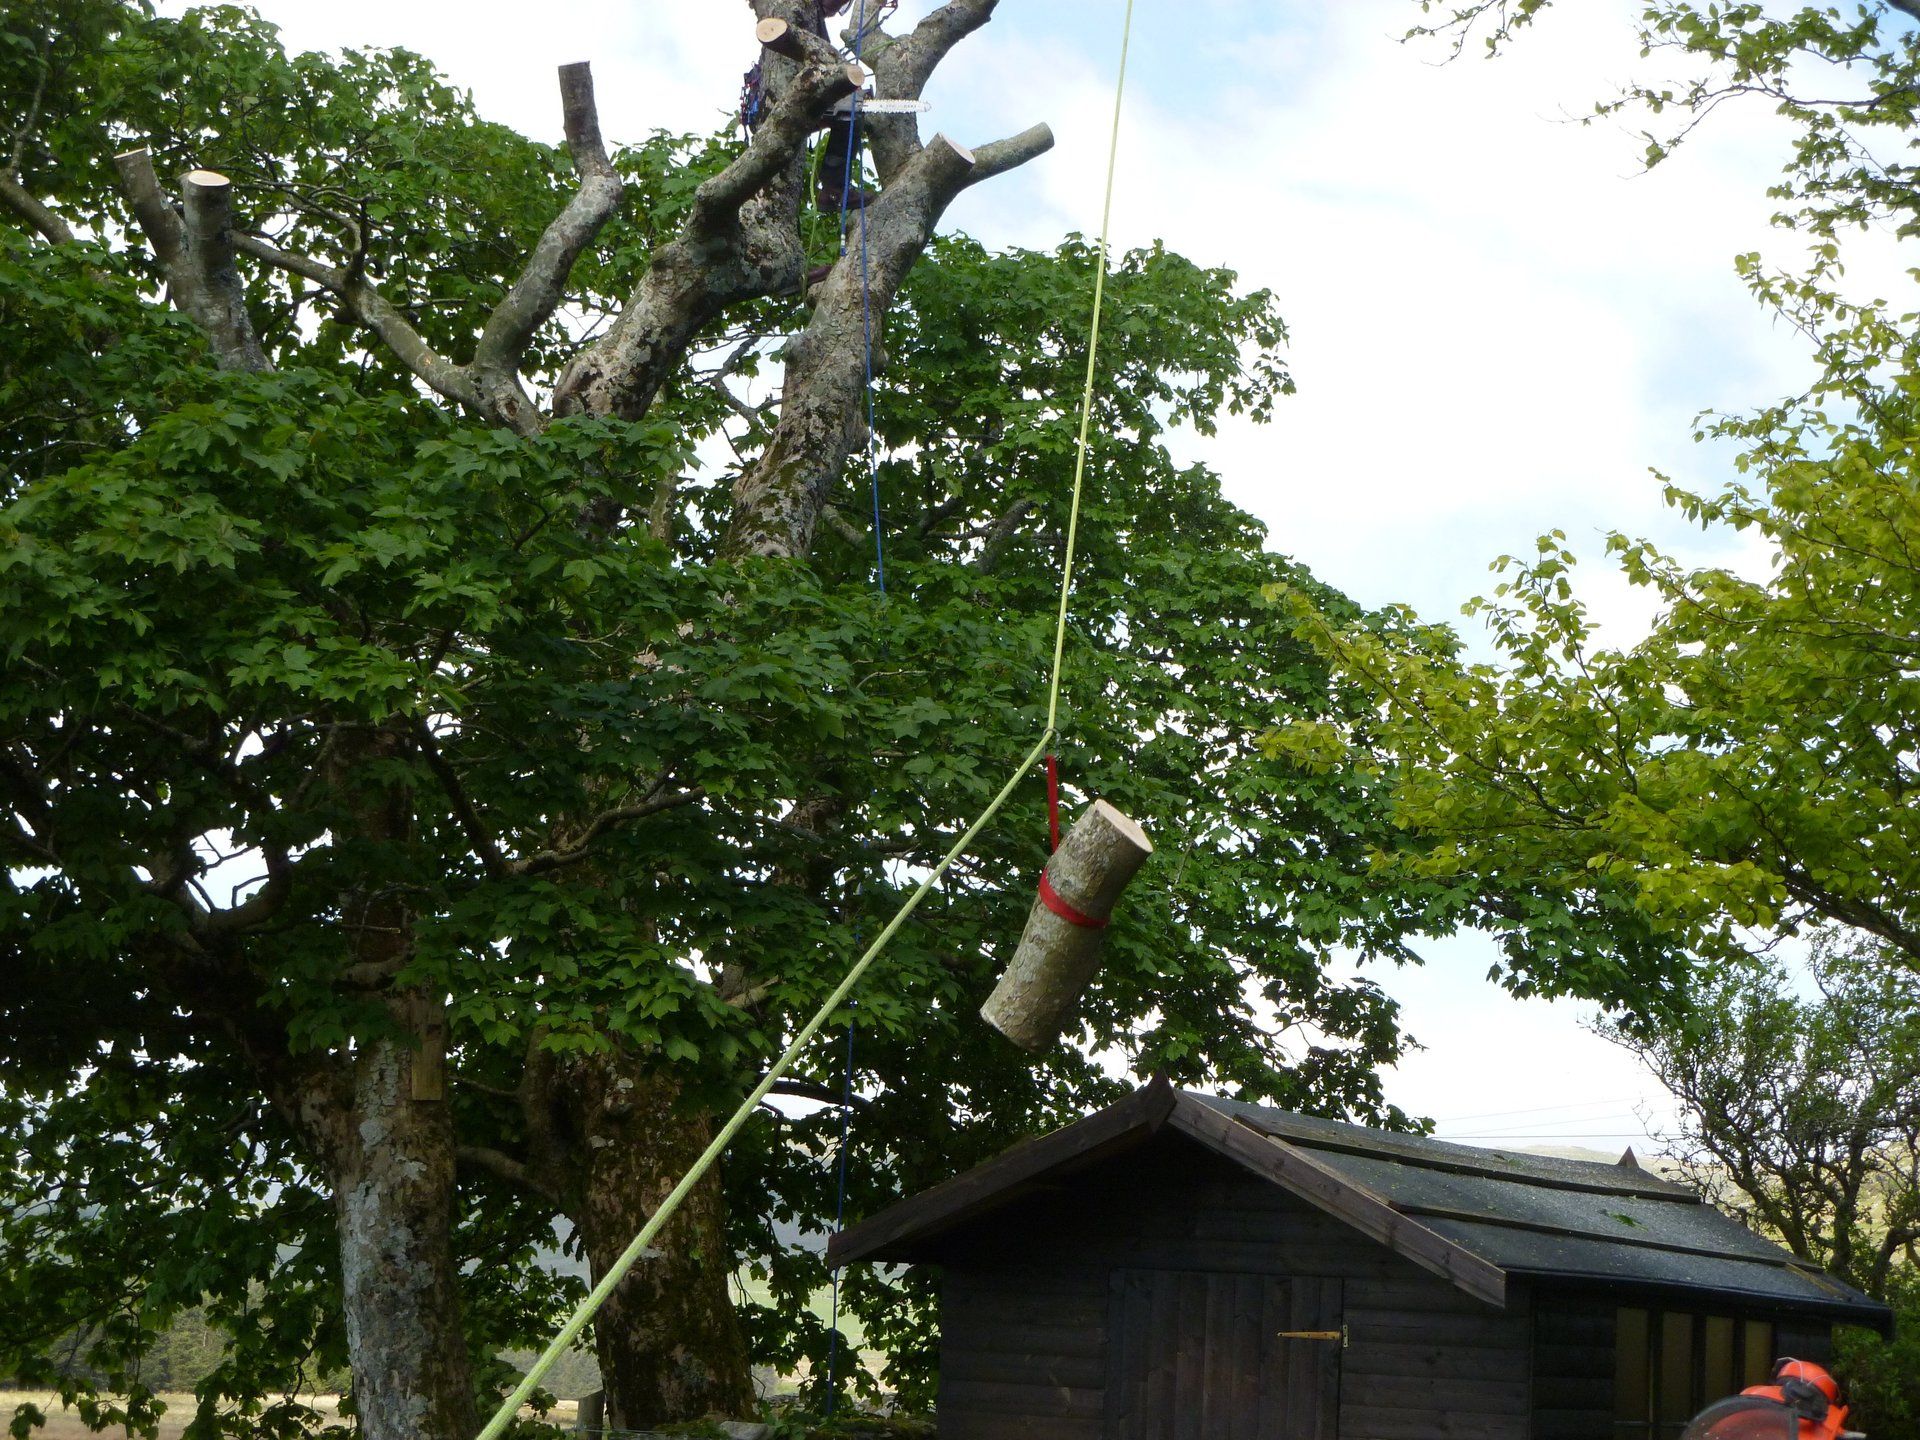 Precision tree work to avoid damaging the shed.